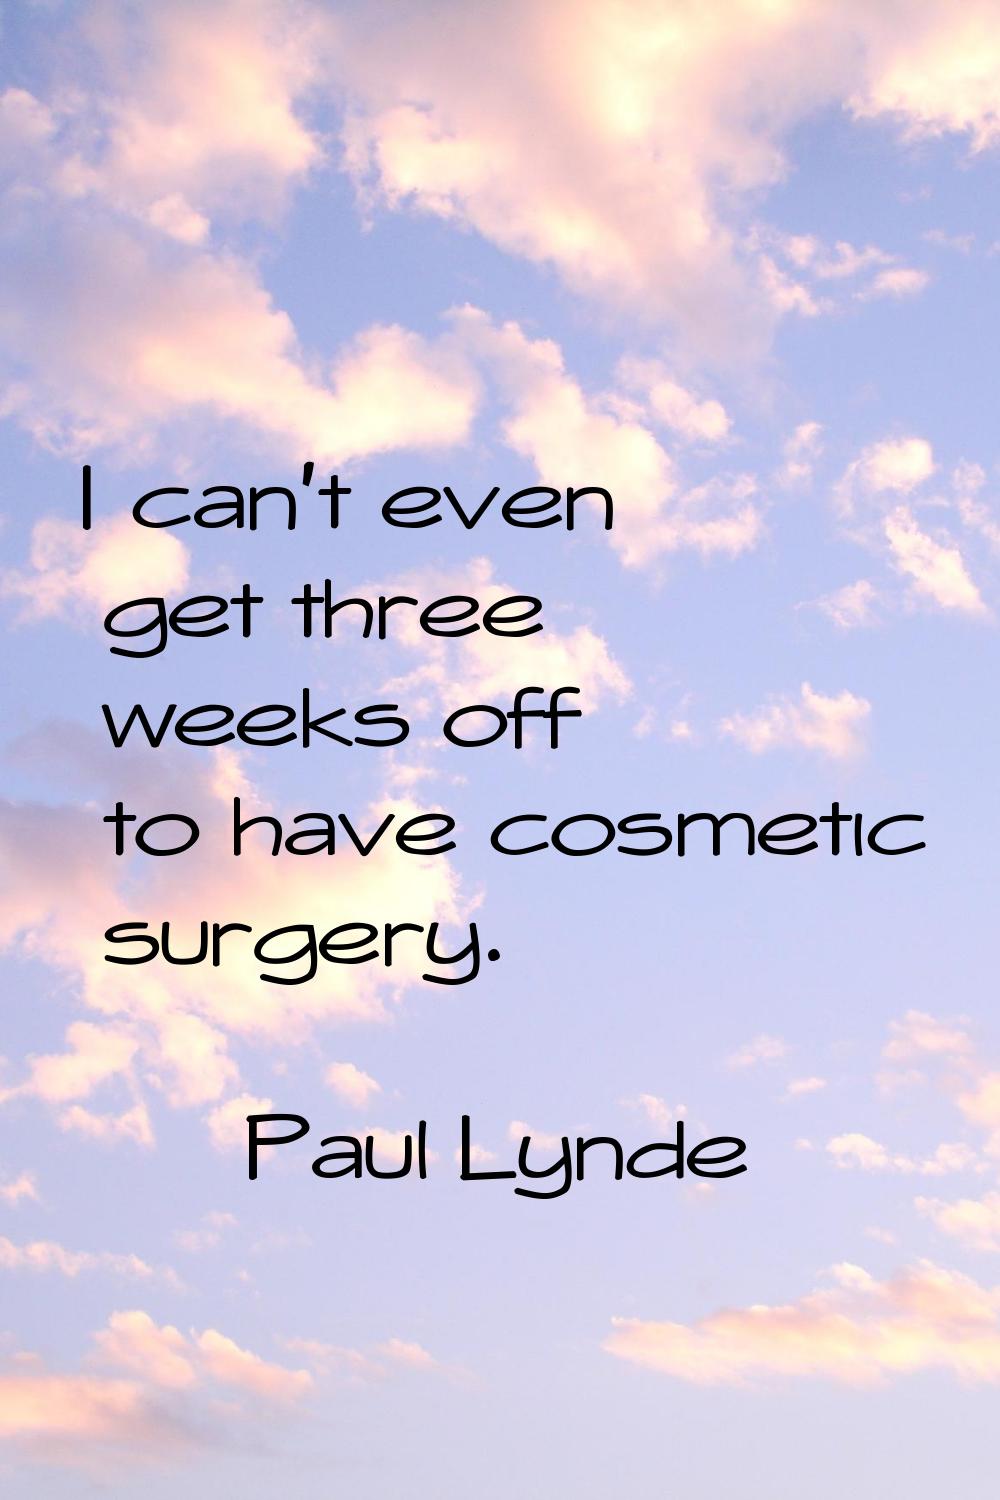 I can't even get three weeks off to have cosmetic surgery.